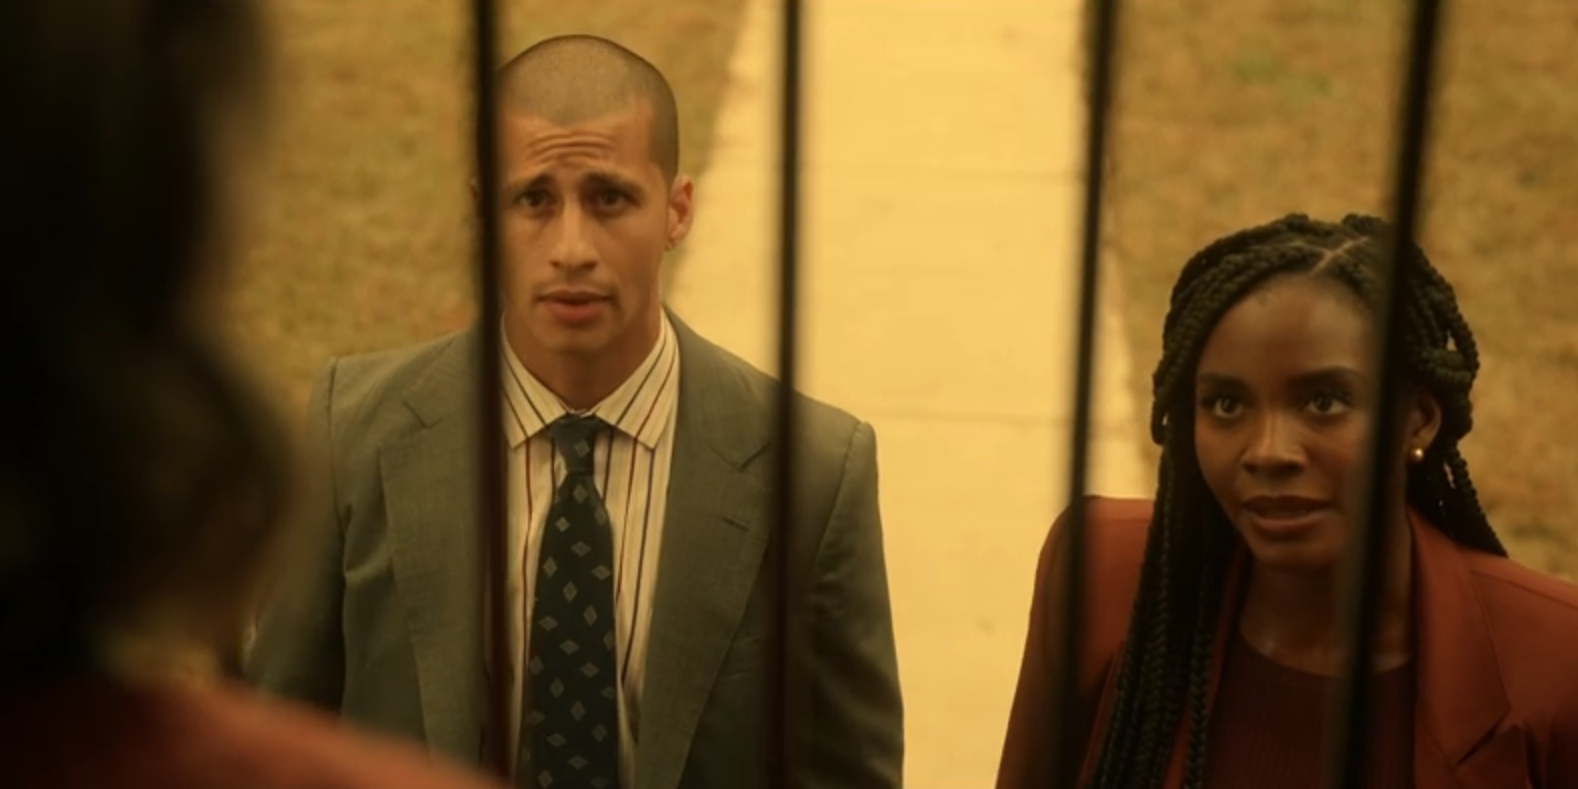 Carlito Olivero as Joaquin Diaz standing next to Dawn Reeve in Them: The Scare